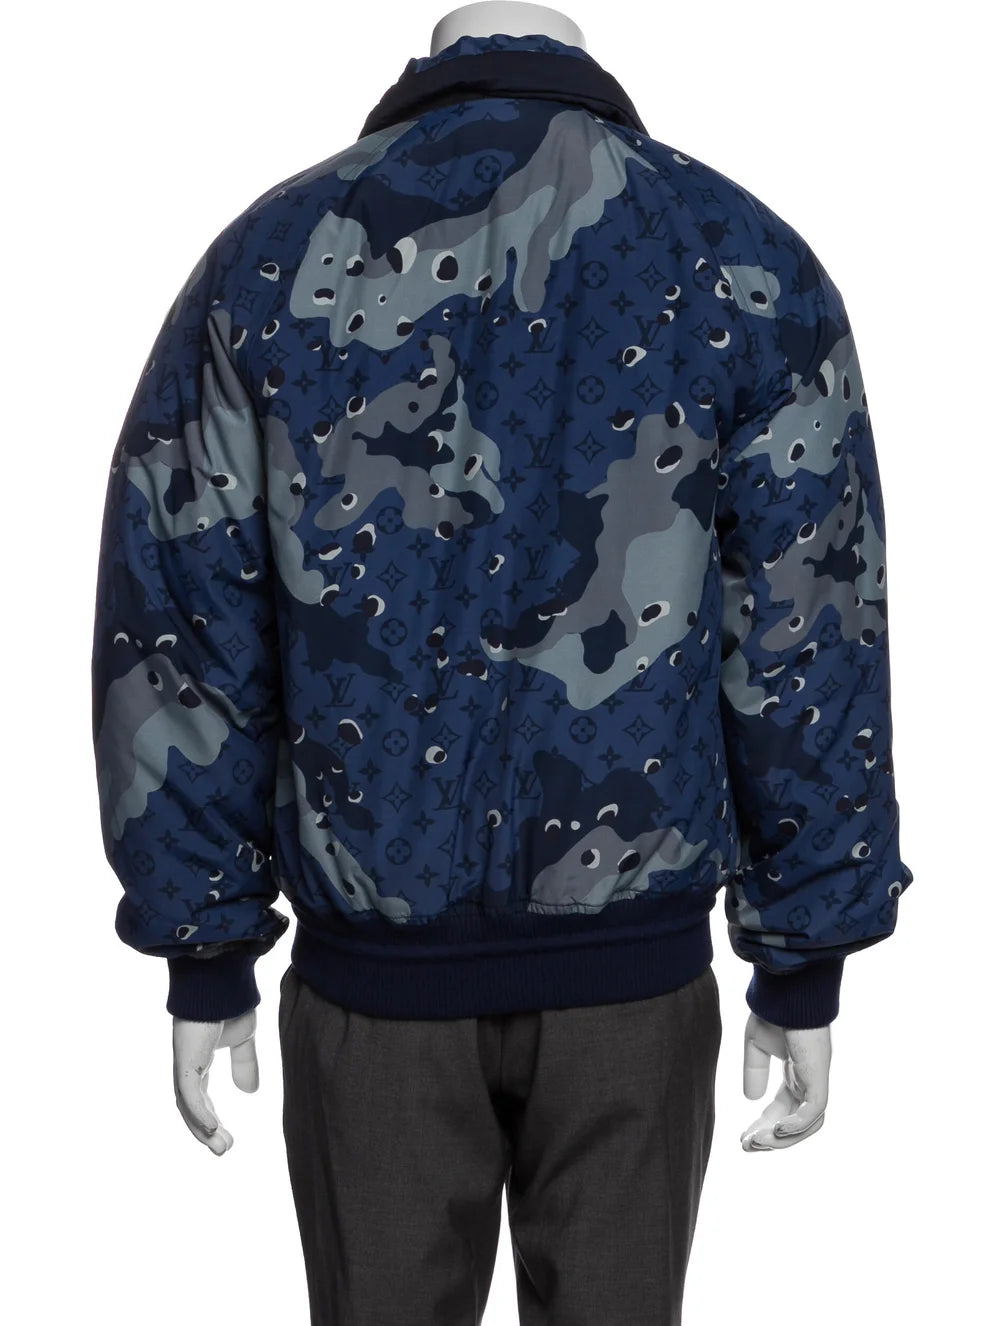 LOUIS VUITTON LV Camouflage Double-Sided Jacket, in Bedford, Bedfordshire